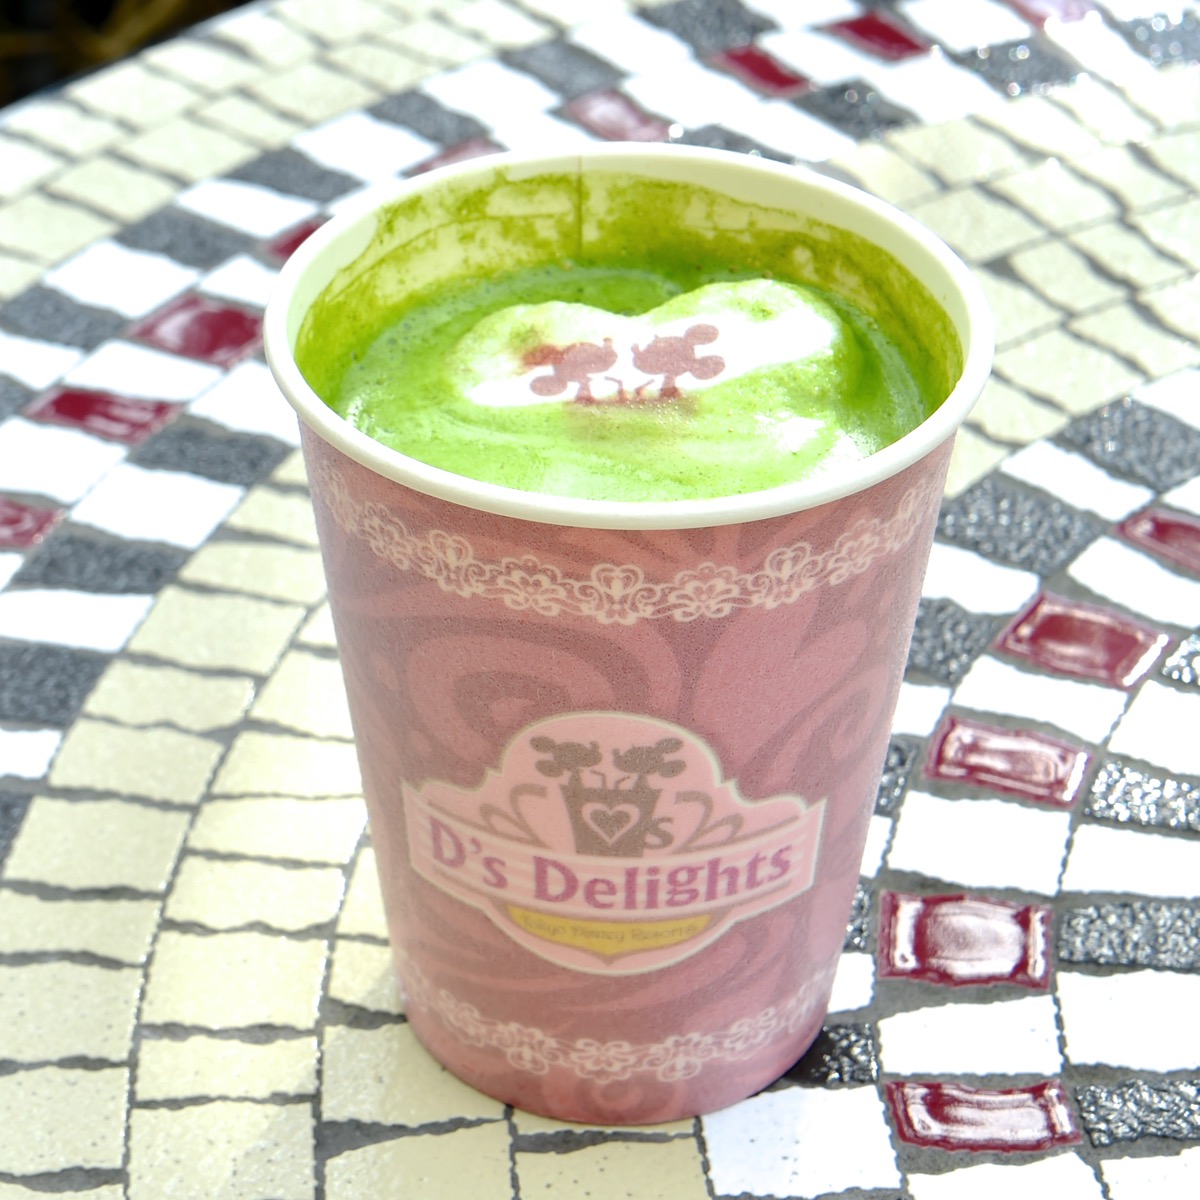 D’s Delights　もなか抹茶ラテ（あずき）